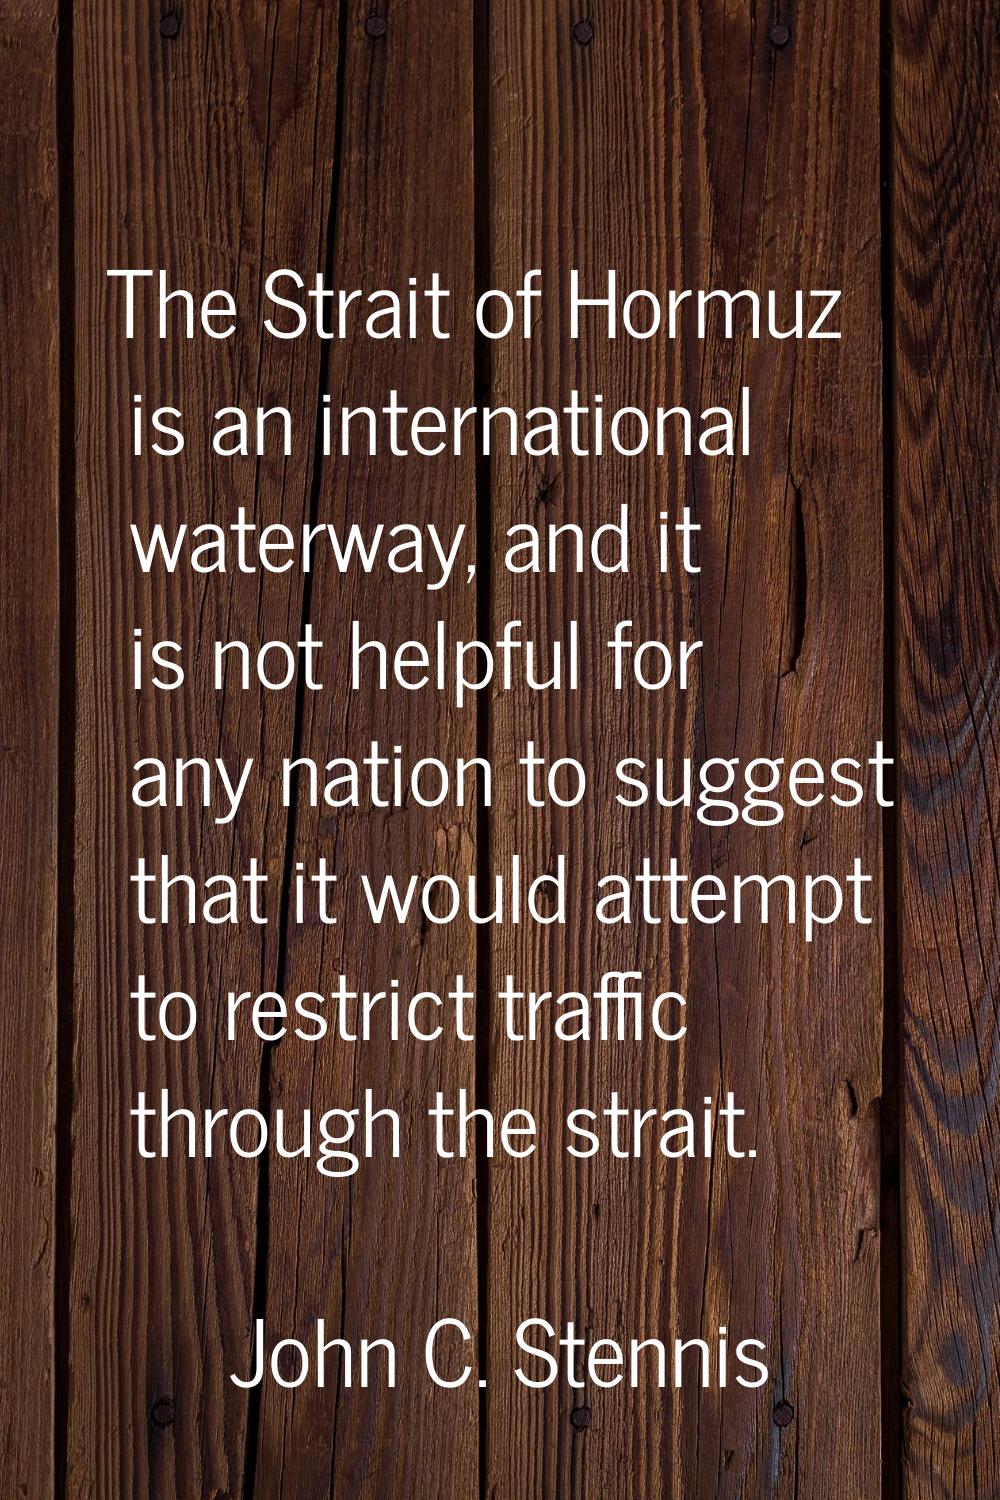 The Strait of Hormuz is an international waterway, and it is not helpful for any nation to suggest 